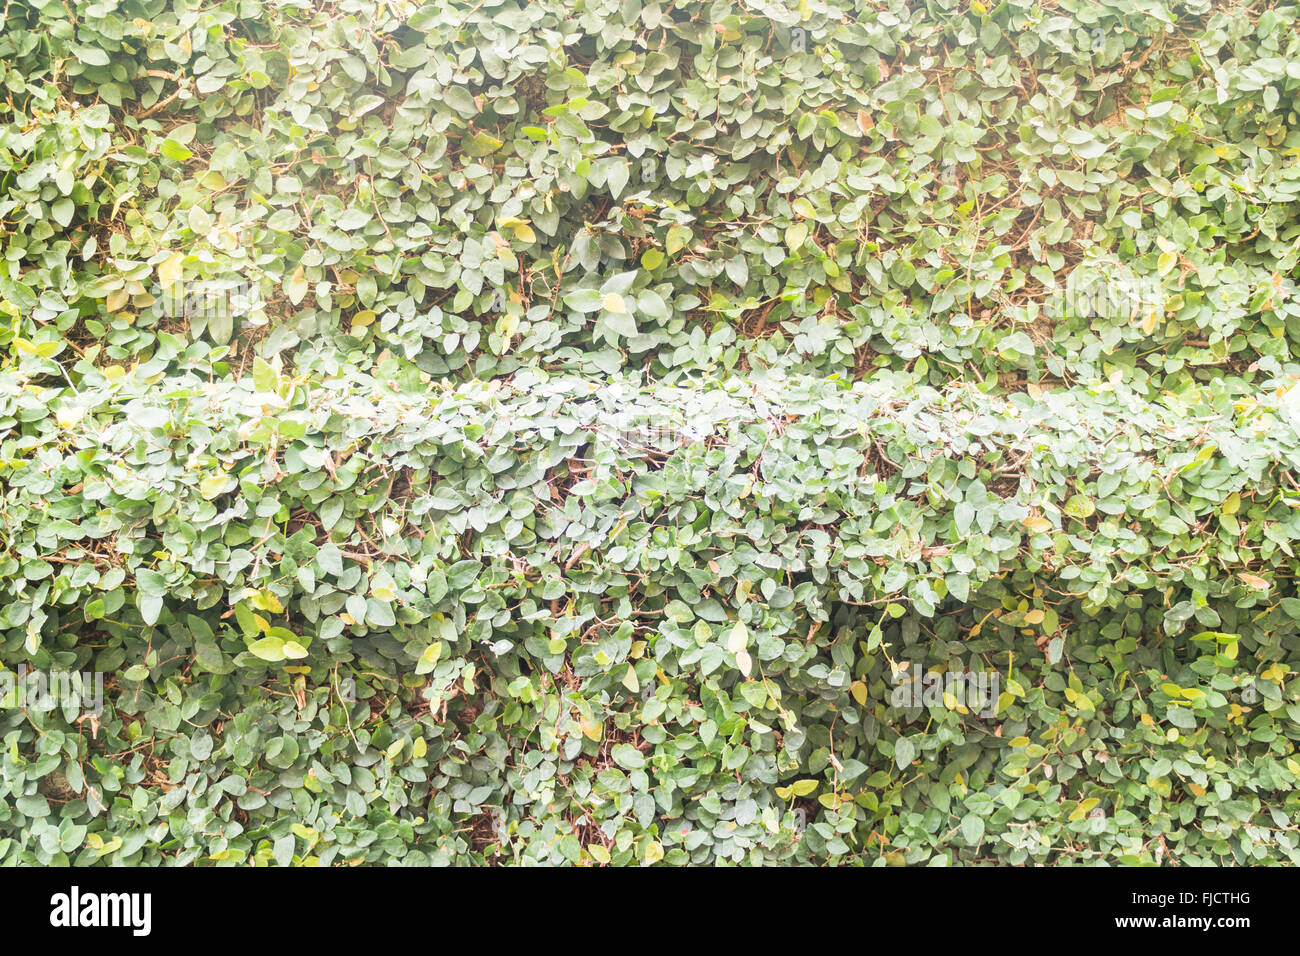 Green ivy plant wall background with vintage filter effect, stock photo Stock Photo